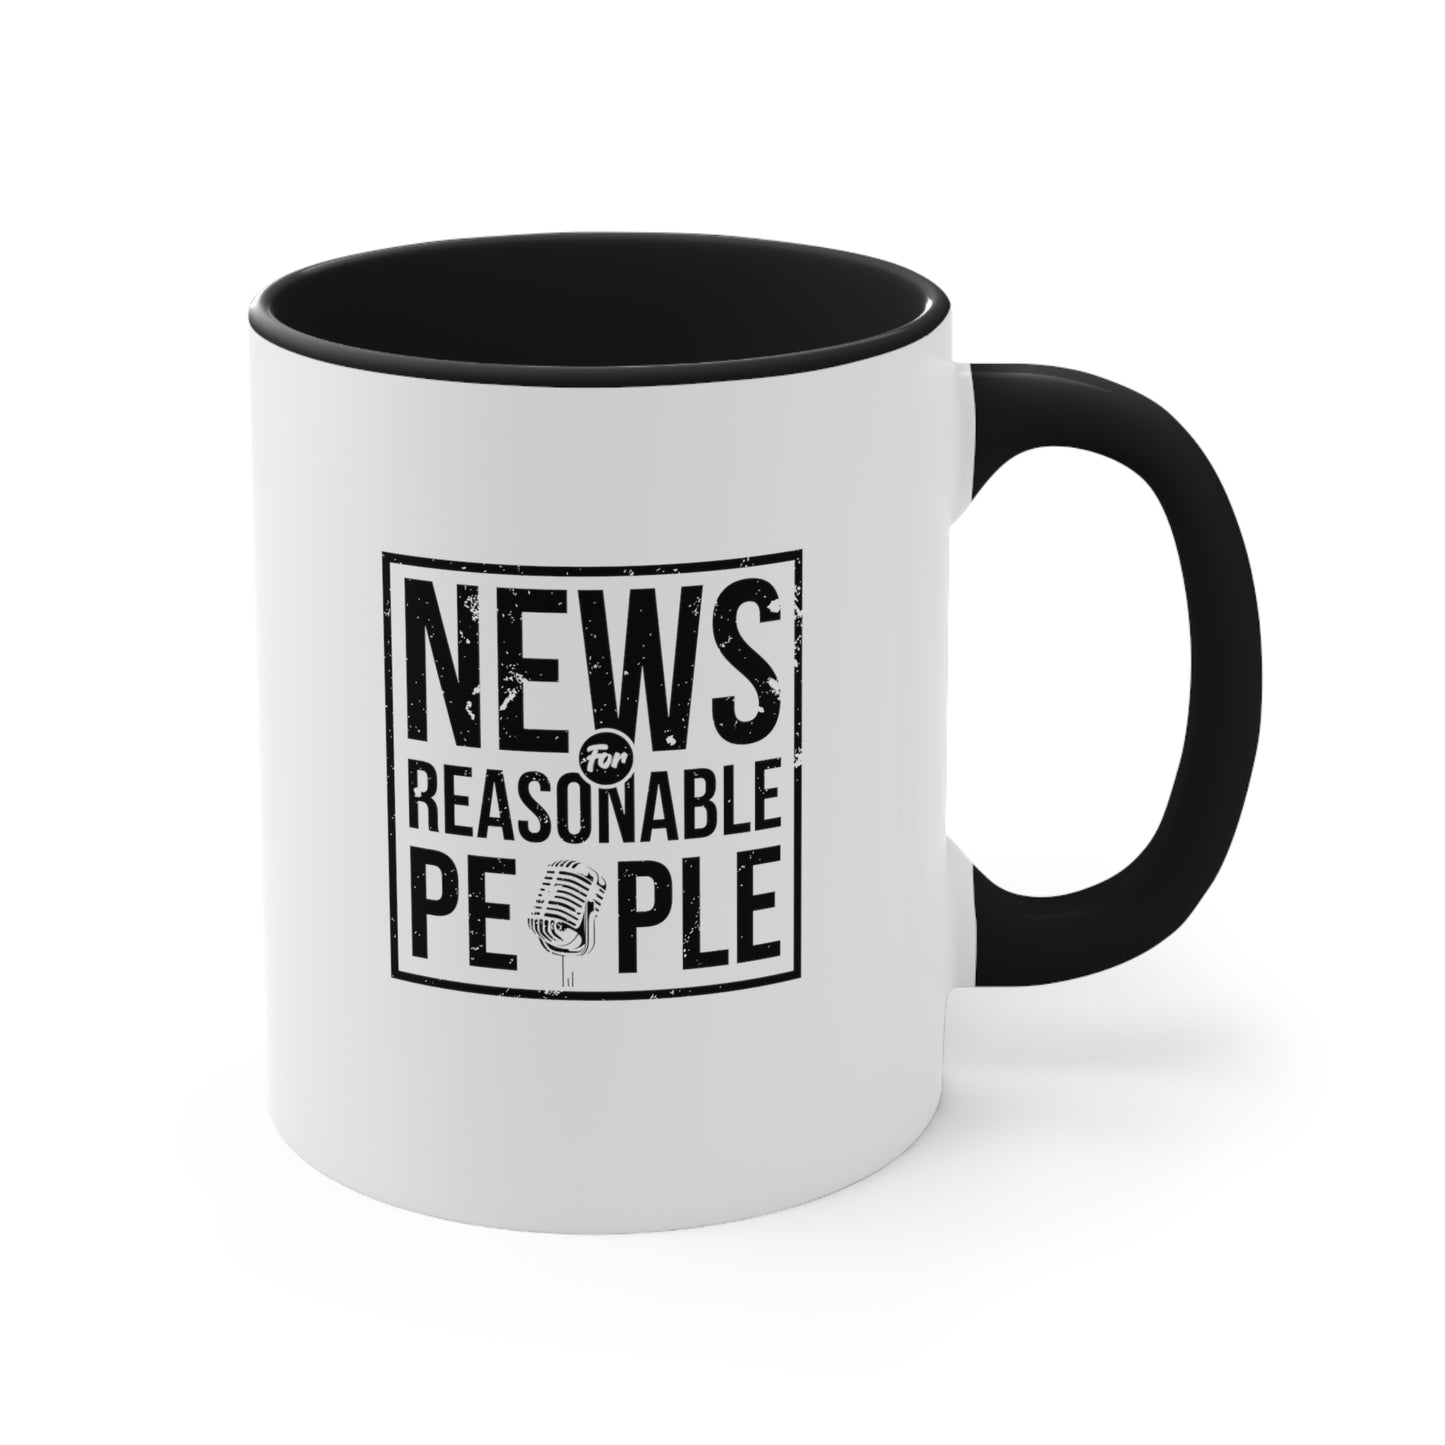 Shenanigans Coffee Cup - Stuff so weird, even the Onion couldn't make it up. - News For Reasonable People